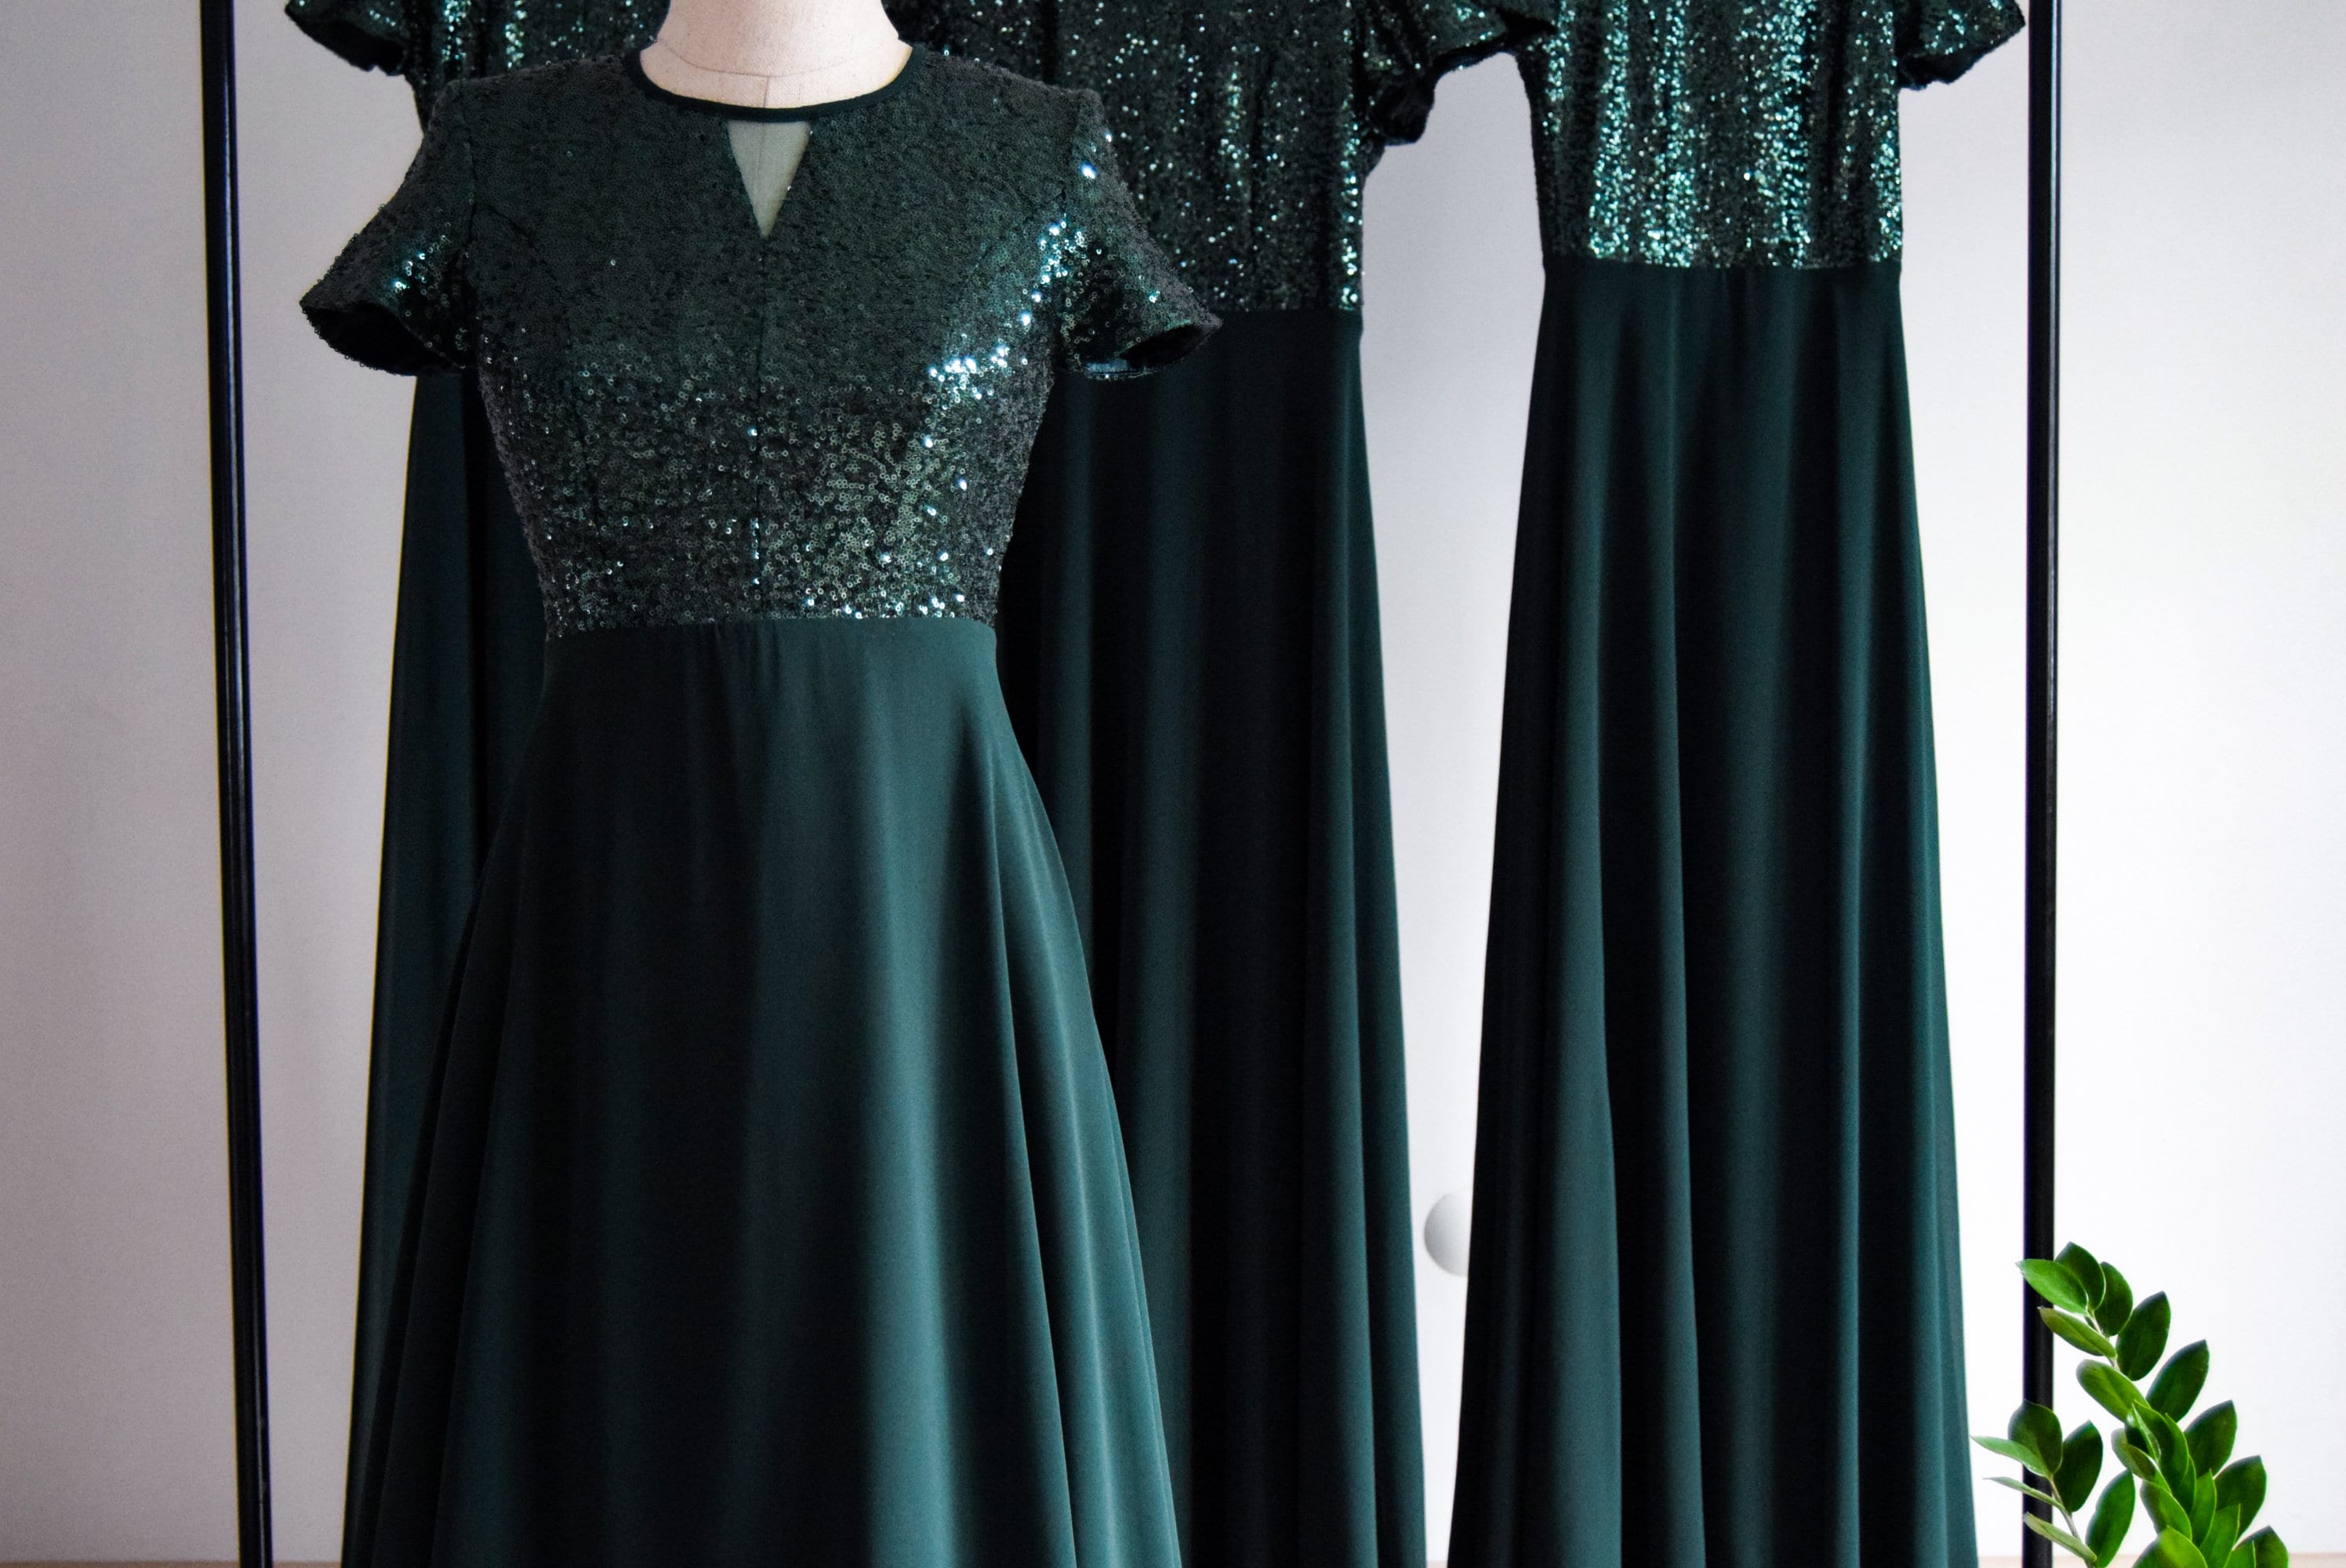 Silk Georgette Chiffon With Top Emerald Jade Green Sequin | Etsy